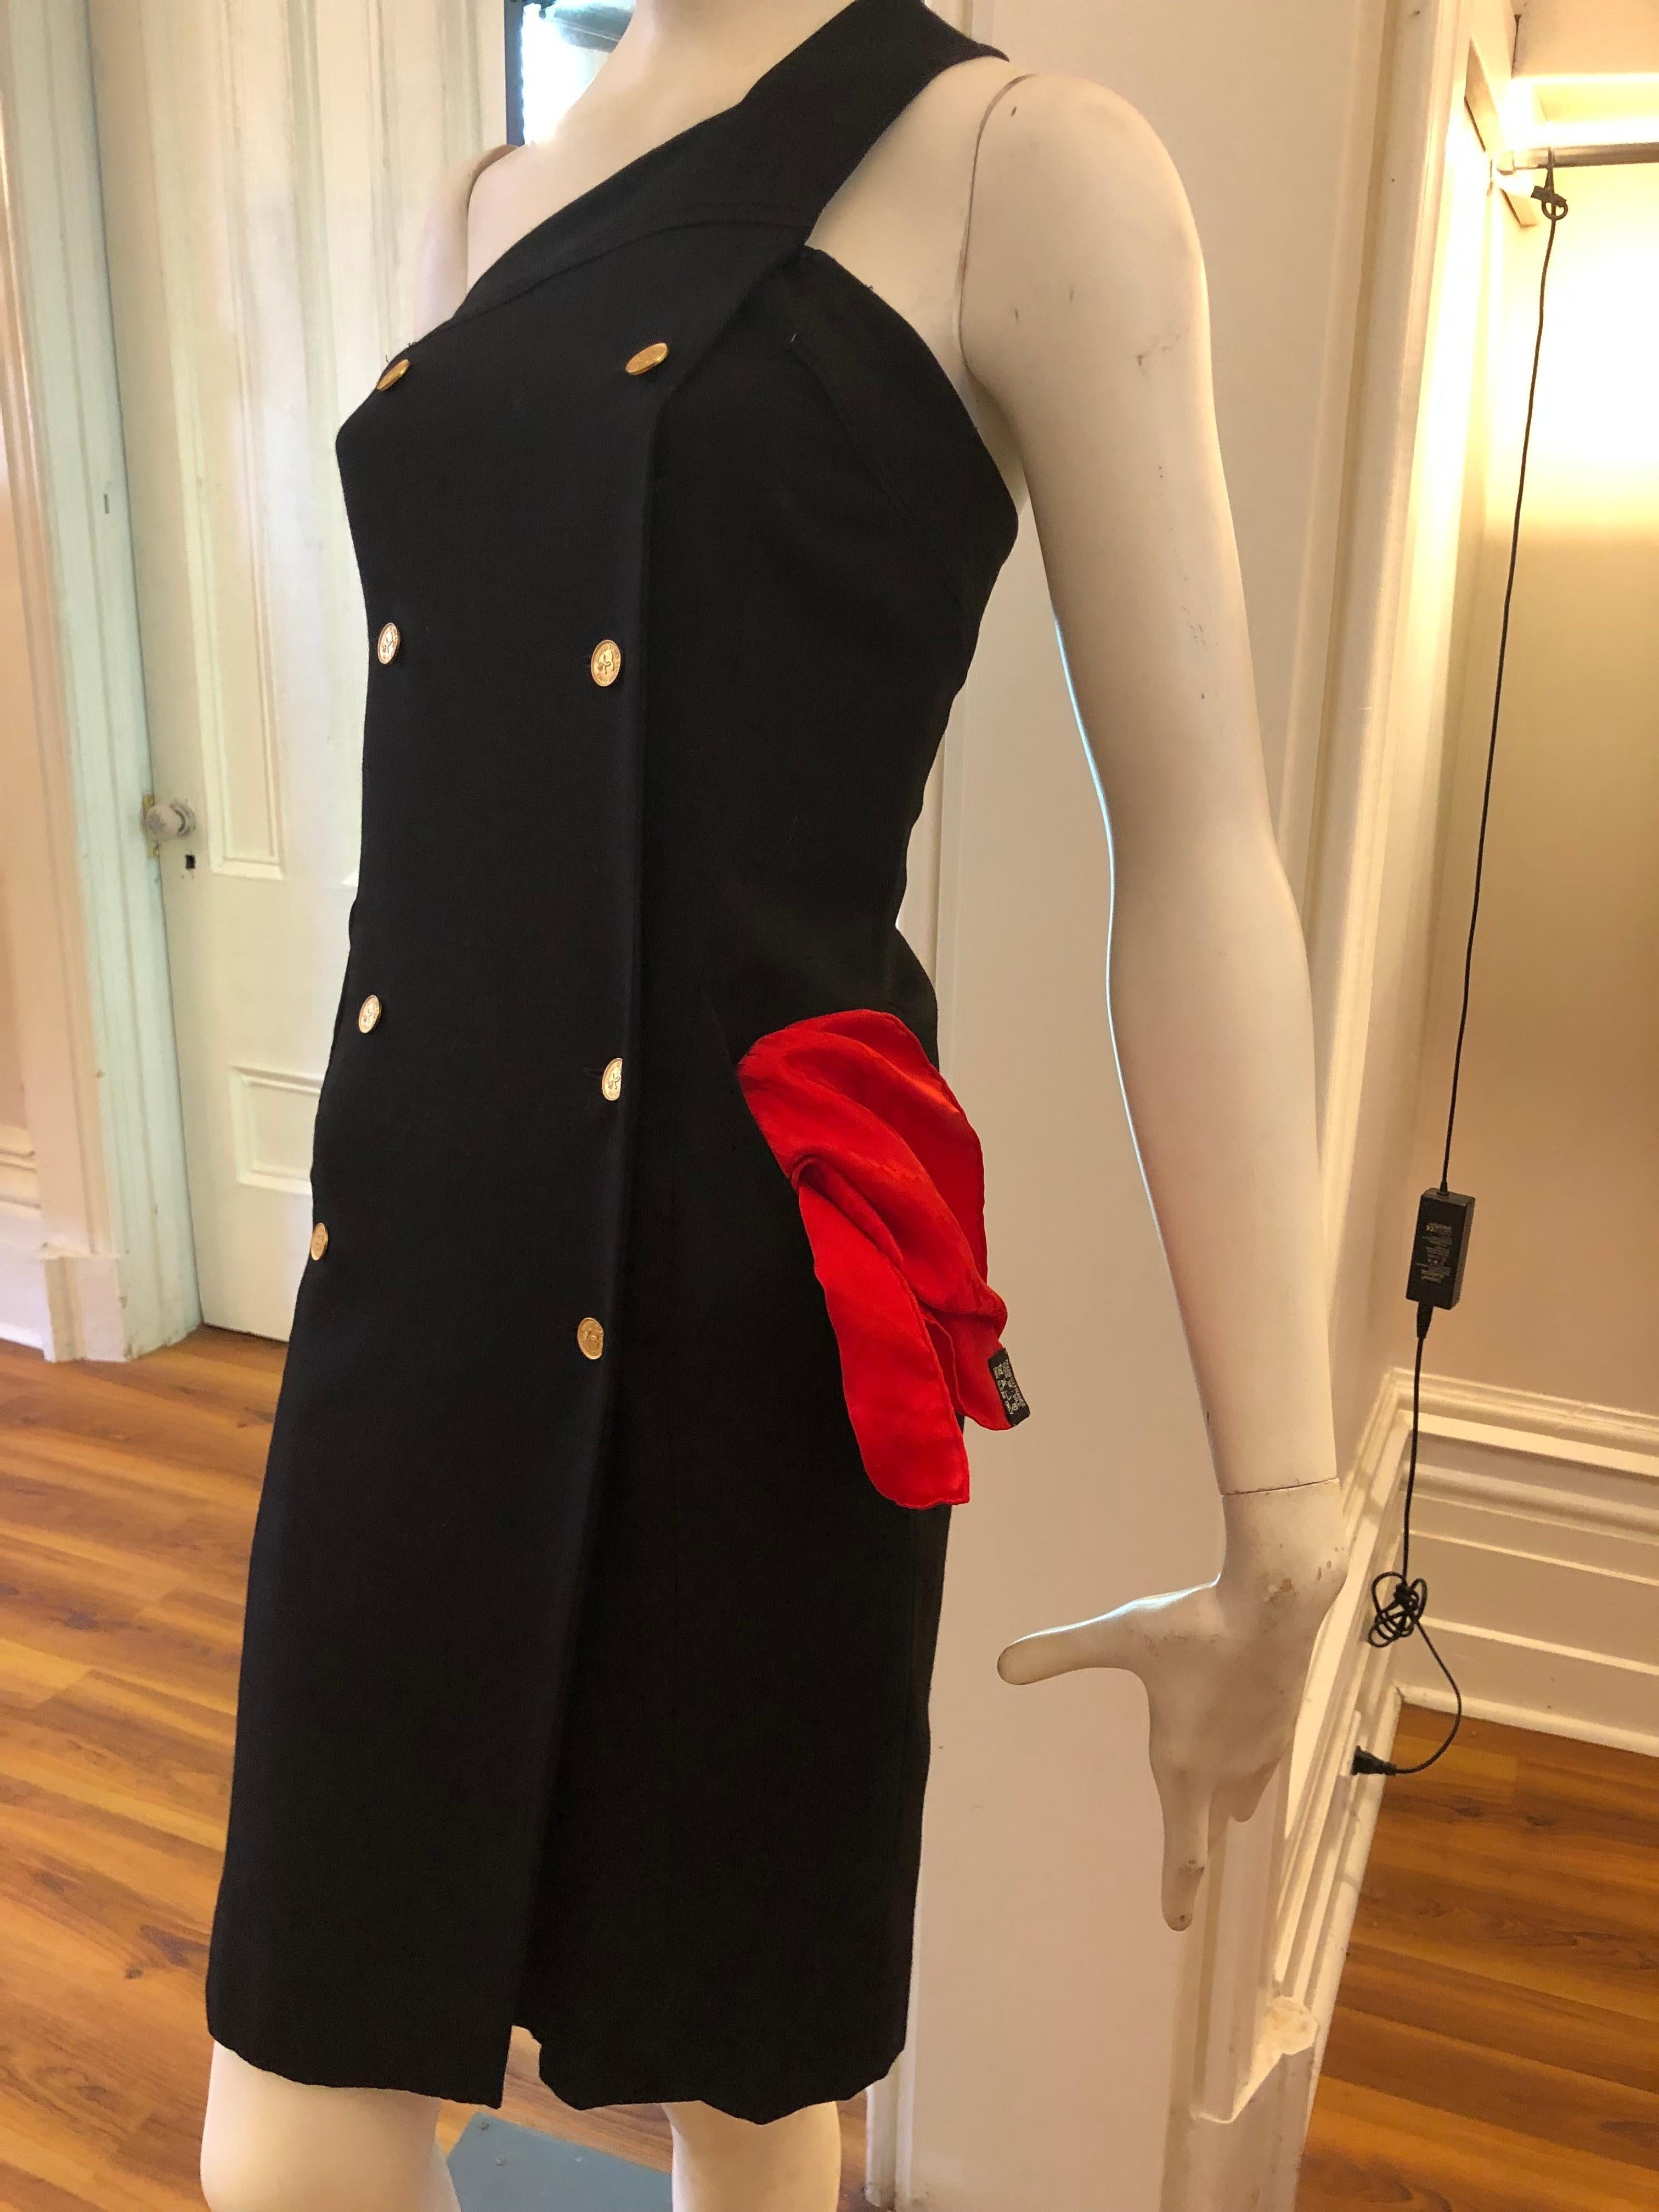 Although a 1980s dress, this black Chanel dress has a very contemporary look. Some of the elements are the one shoulder; two front slit pockets; very fine wool; numerous gold-tone buttons, and double rows of buttons.